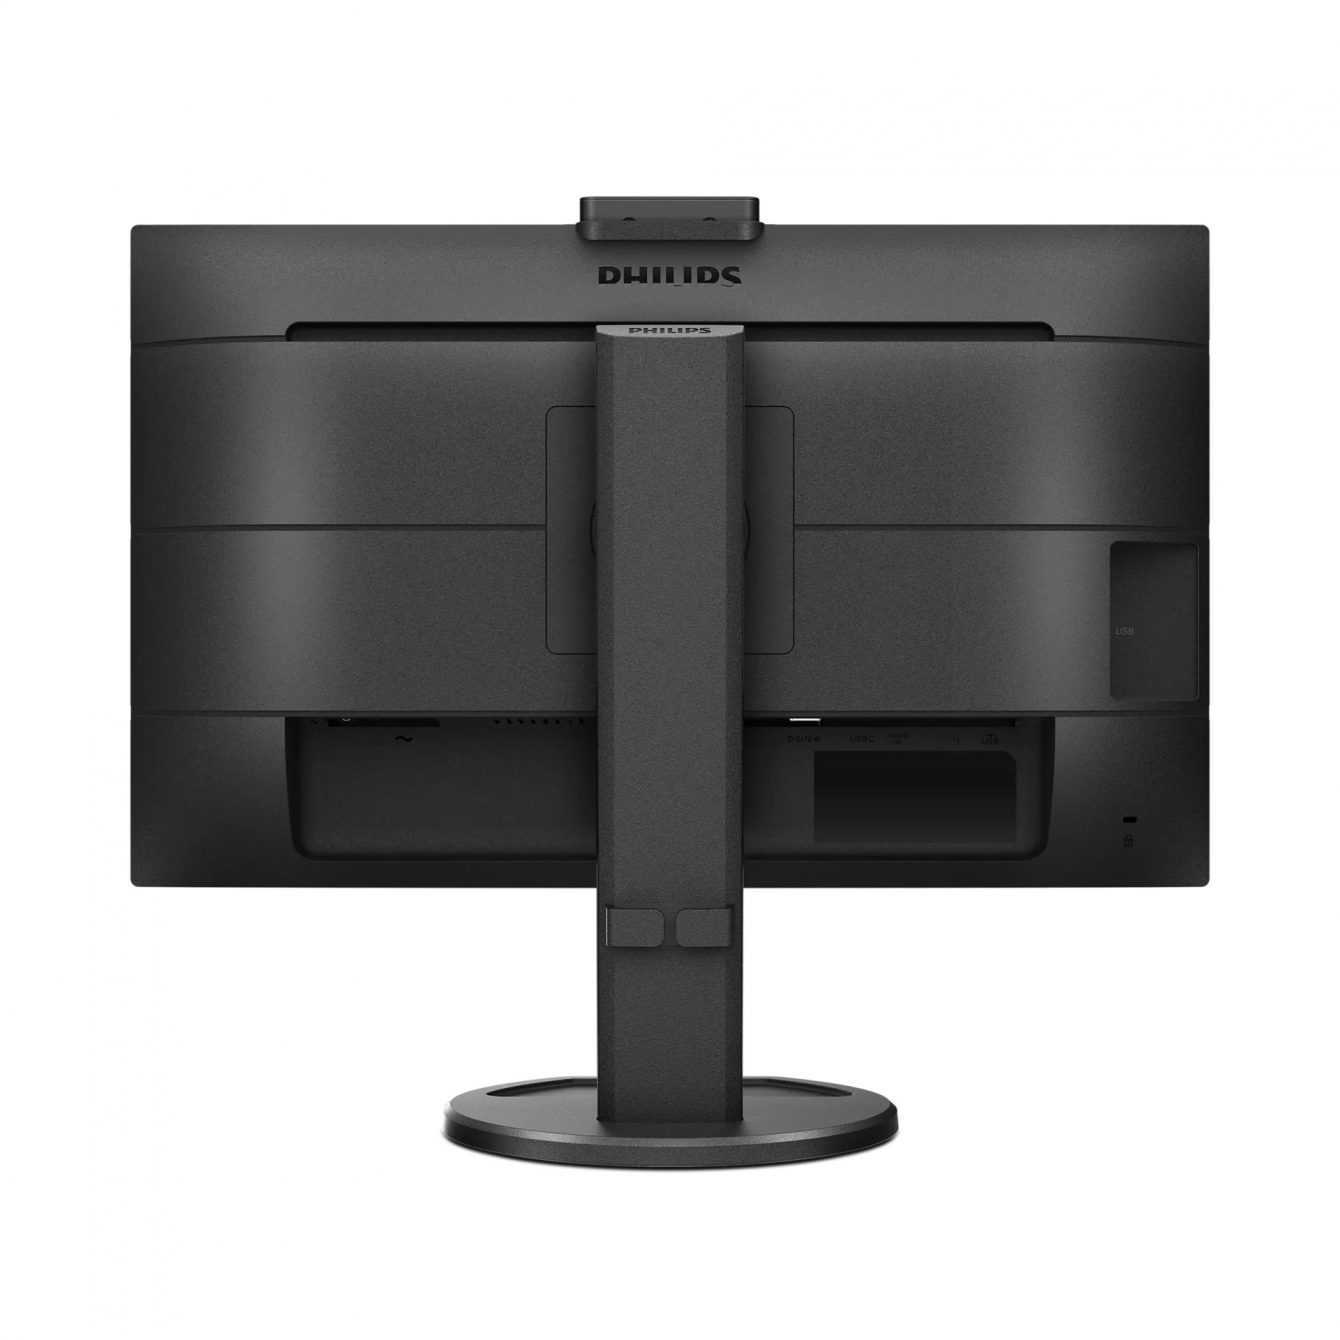 Philips B Line 243B9H: for an elegant and functional workstation